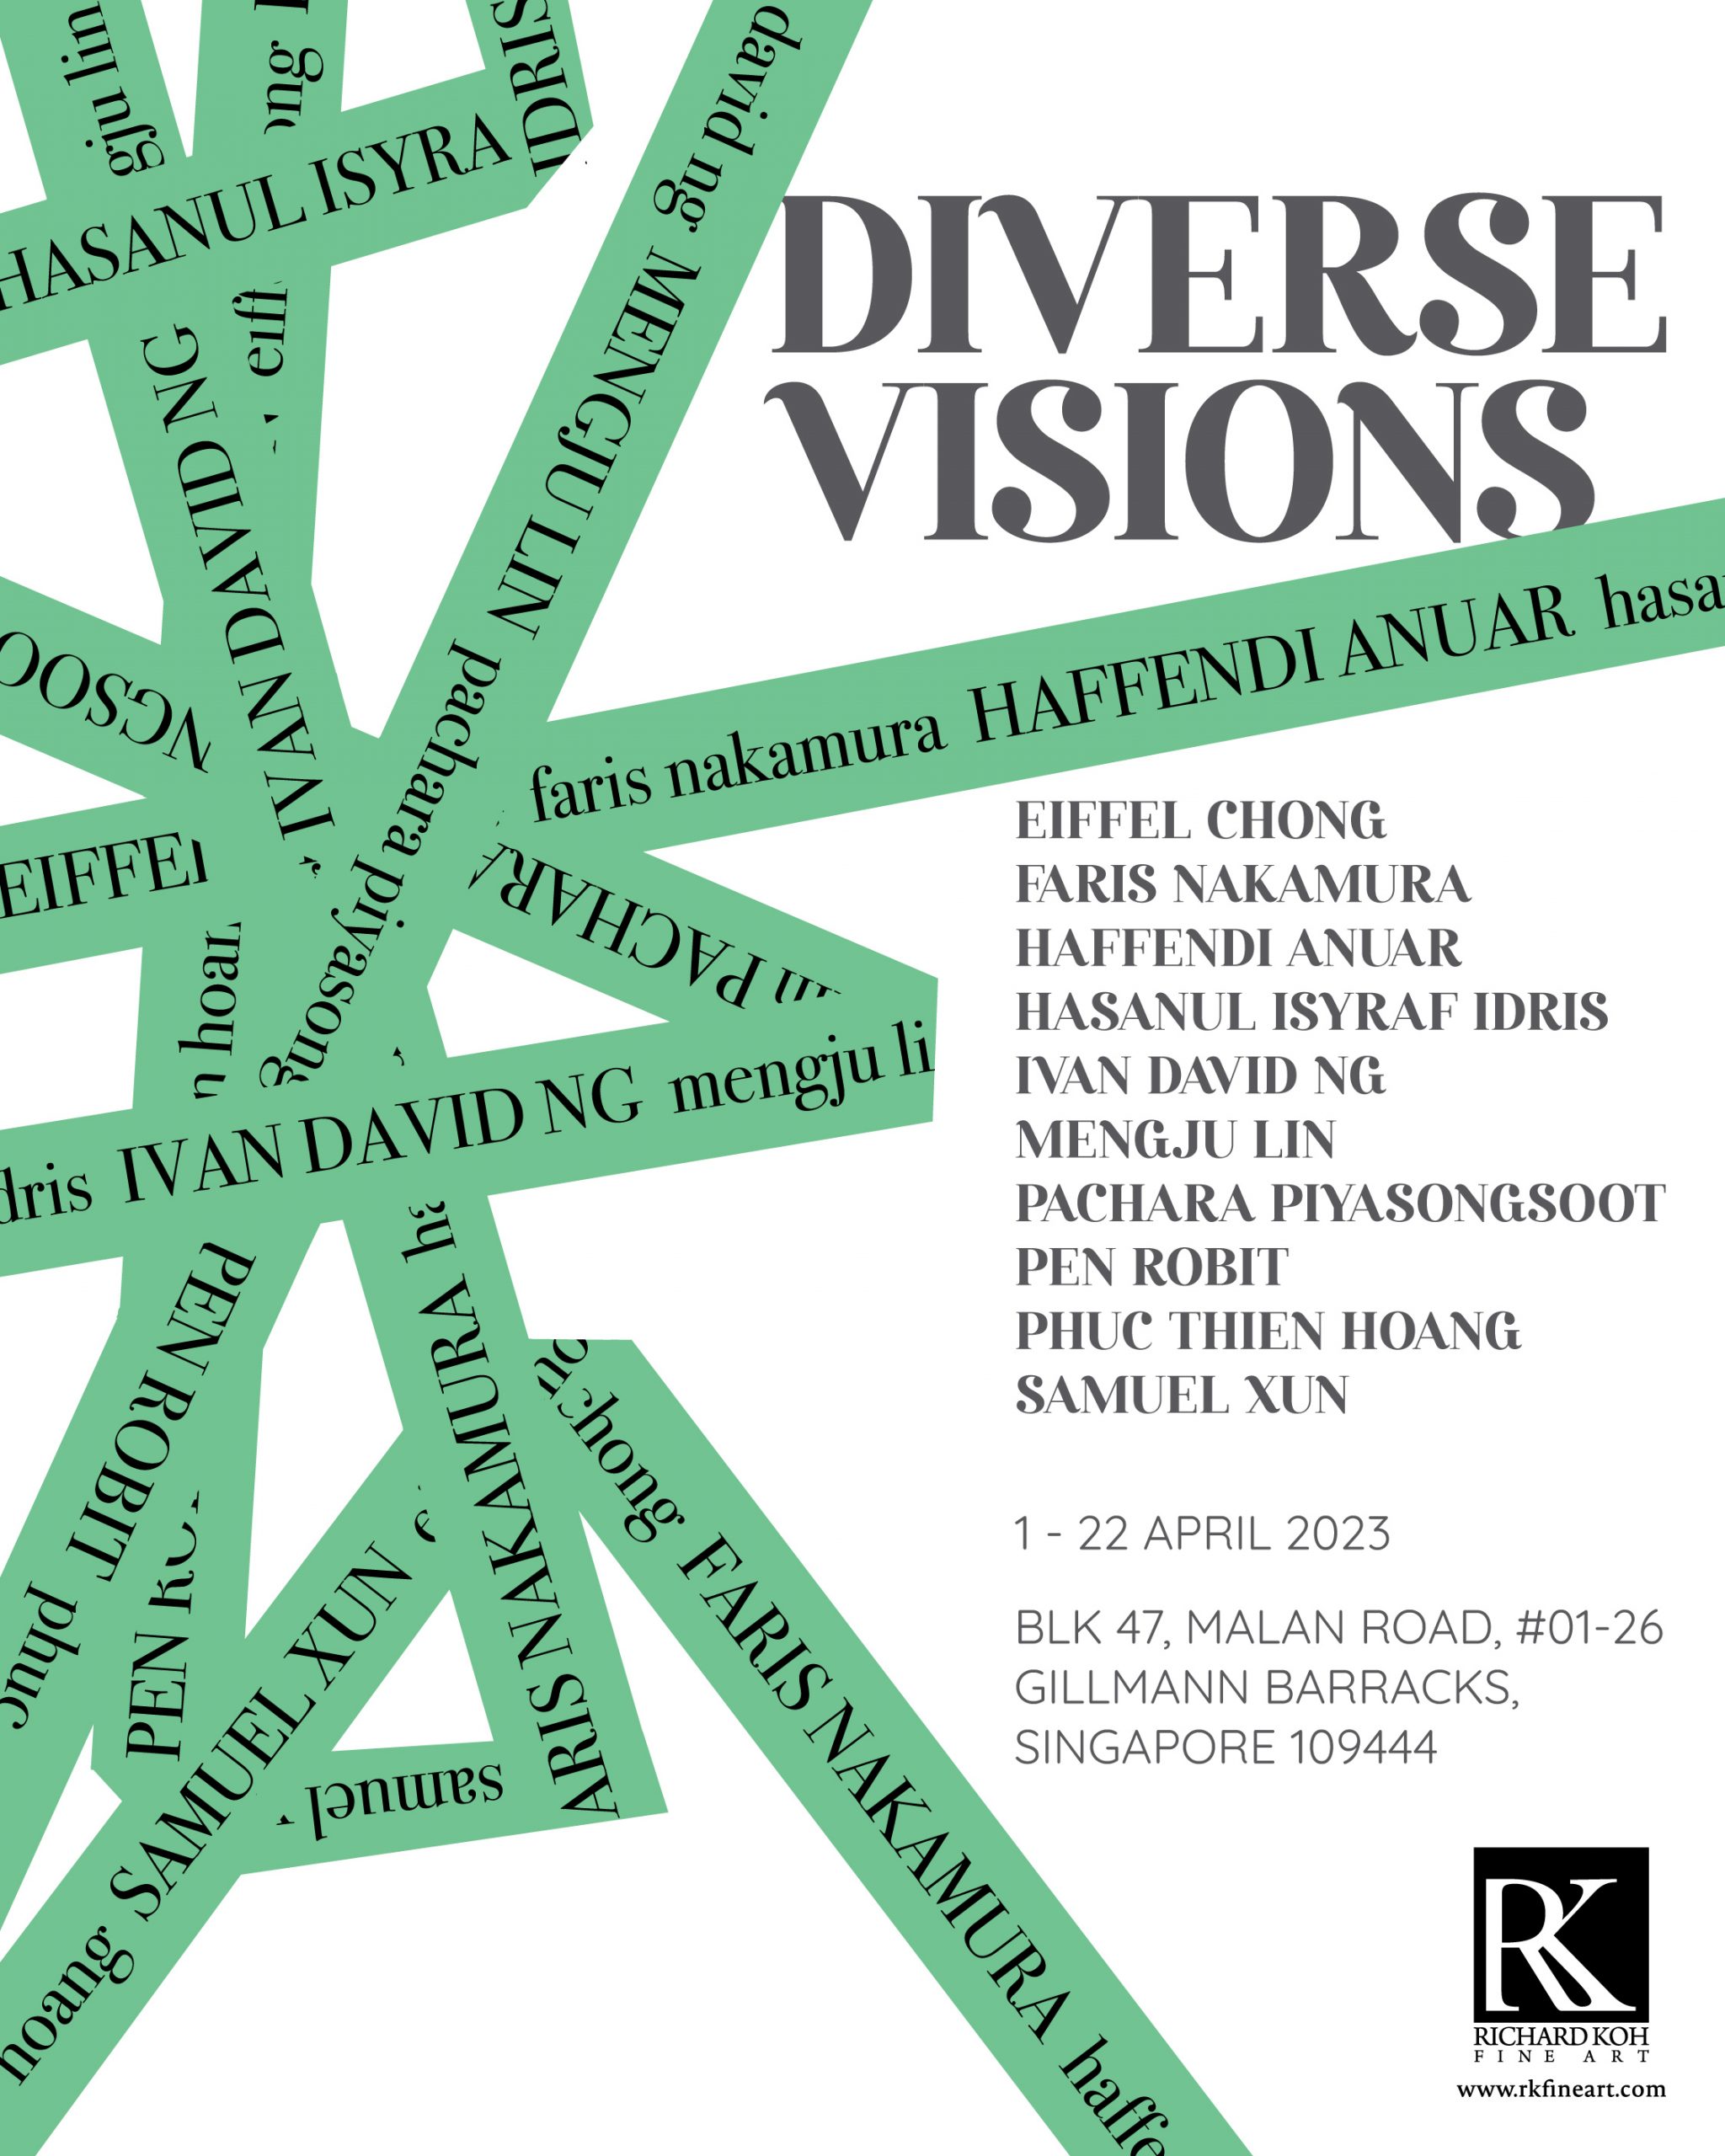   Diverse Visions (A Group Exhibition of Southeast Asian Artists)